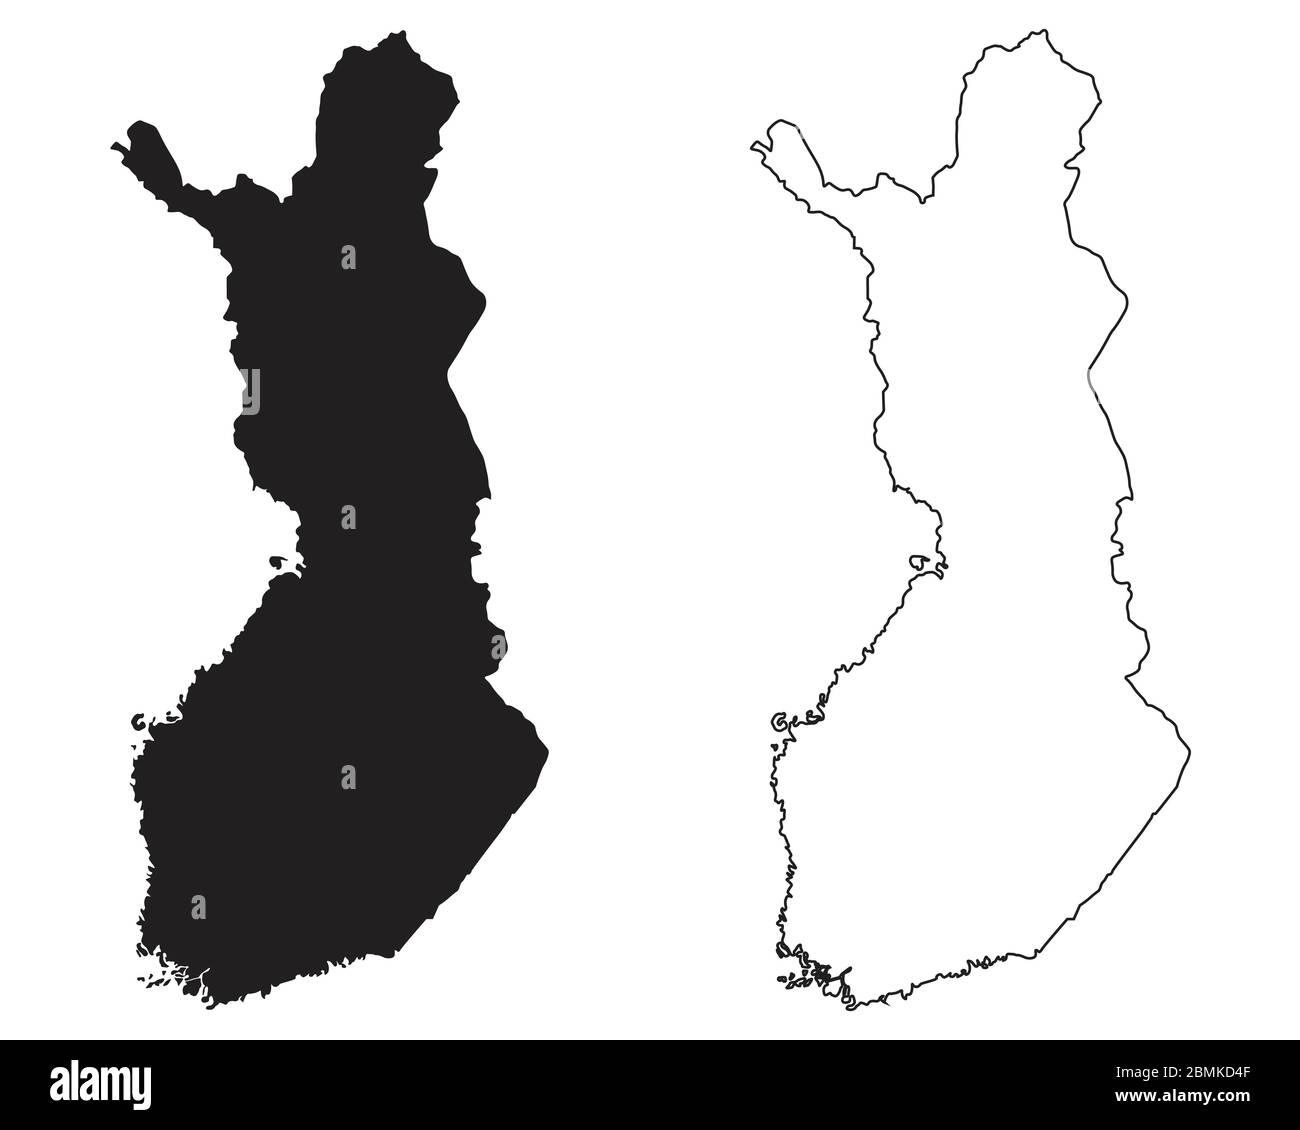 Finland Country Map. Black silhouette and outline isolated on white background. EPS Vector Stock Vector